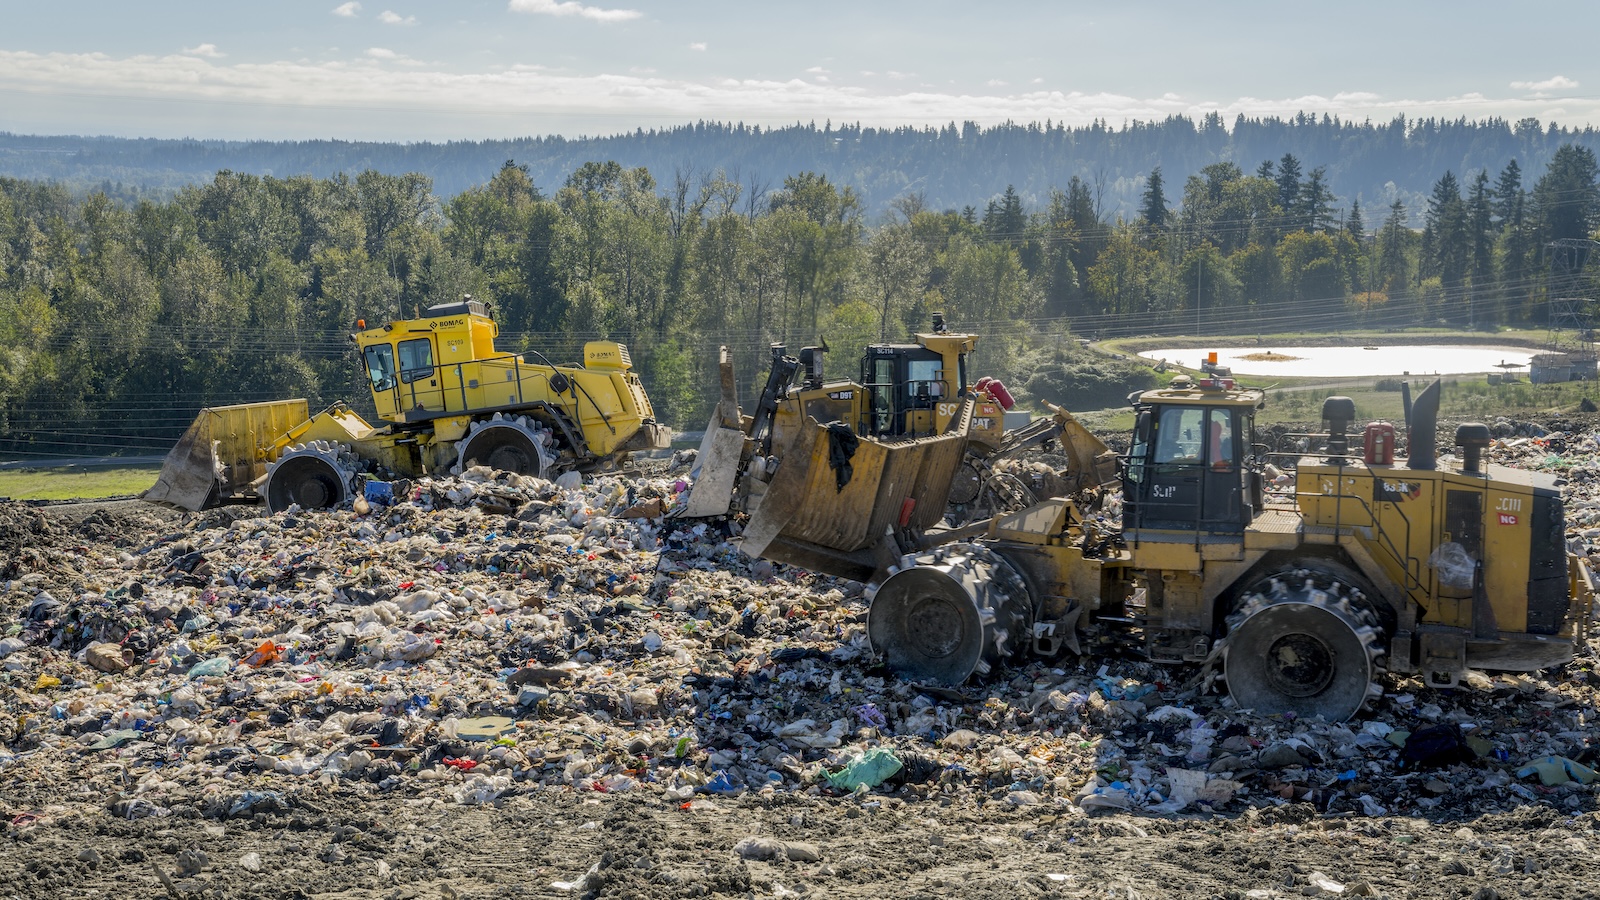 Tractors sit on top of a landfill, with forest in background